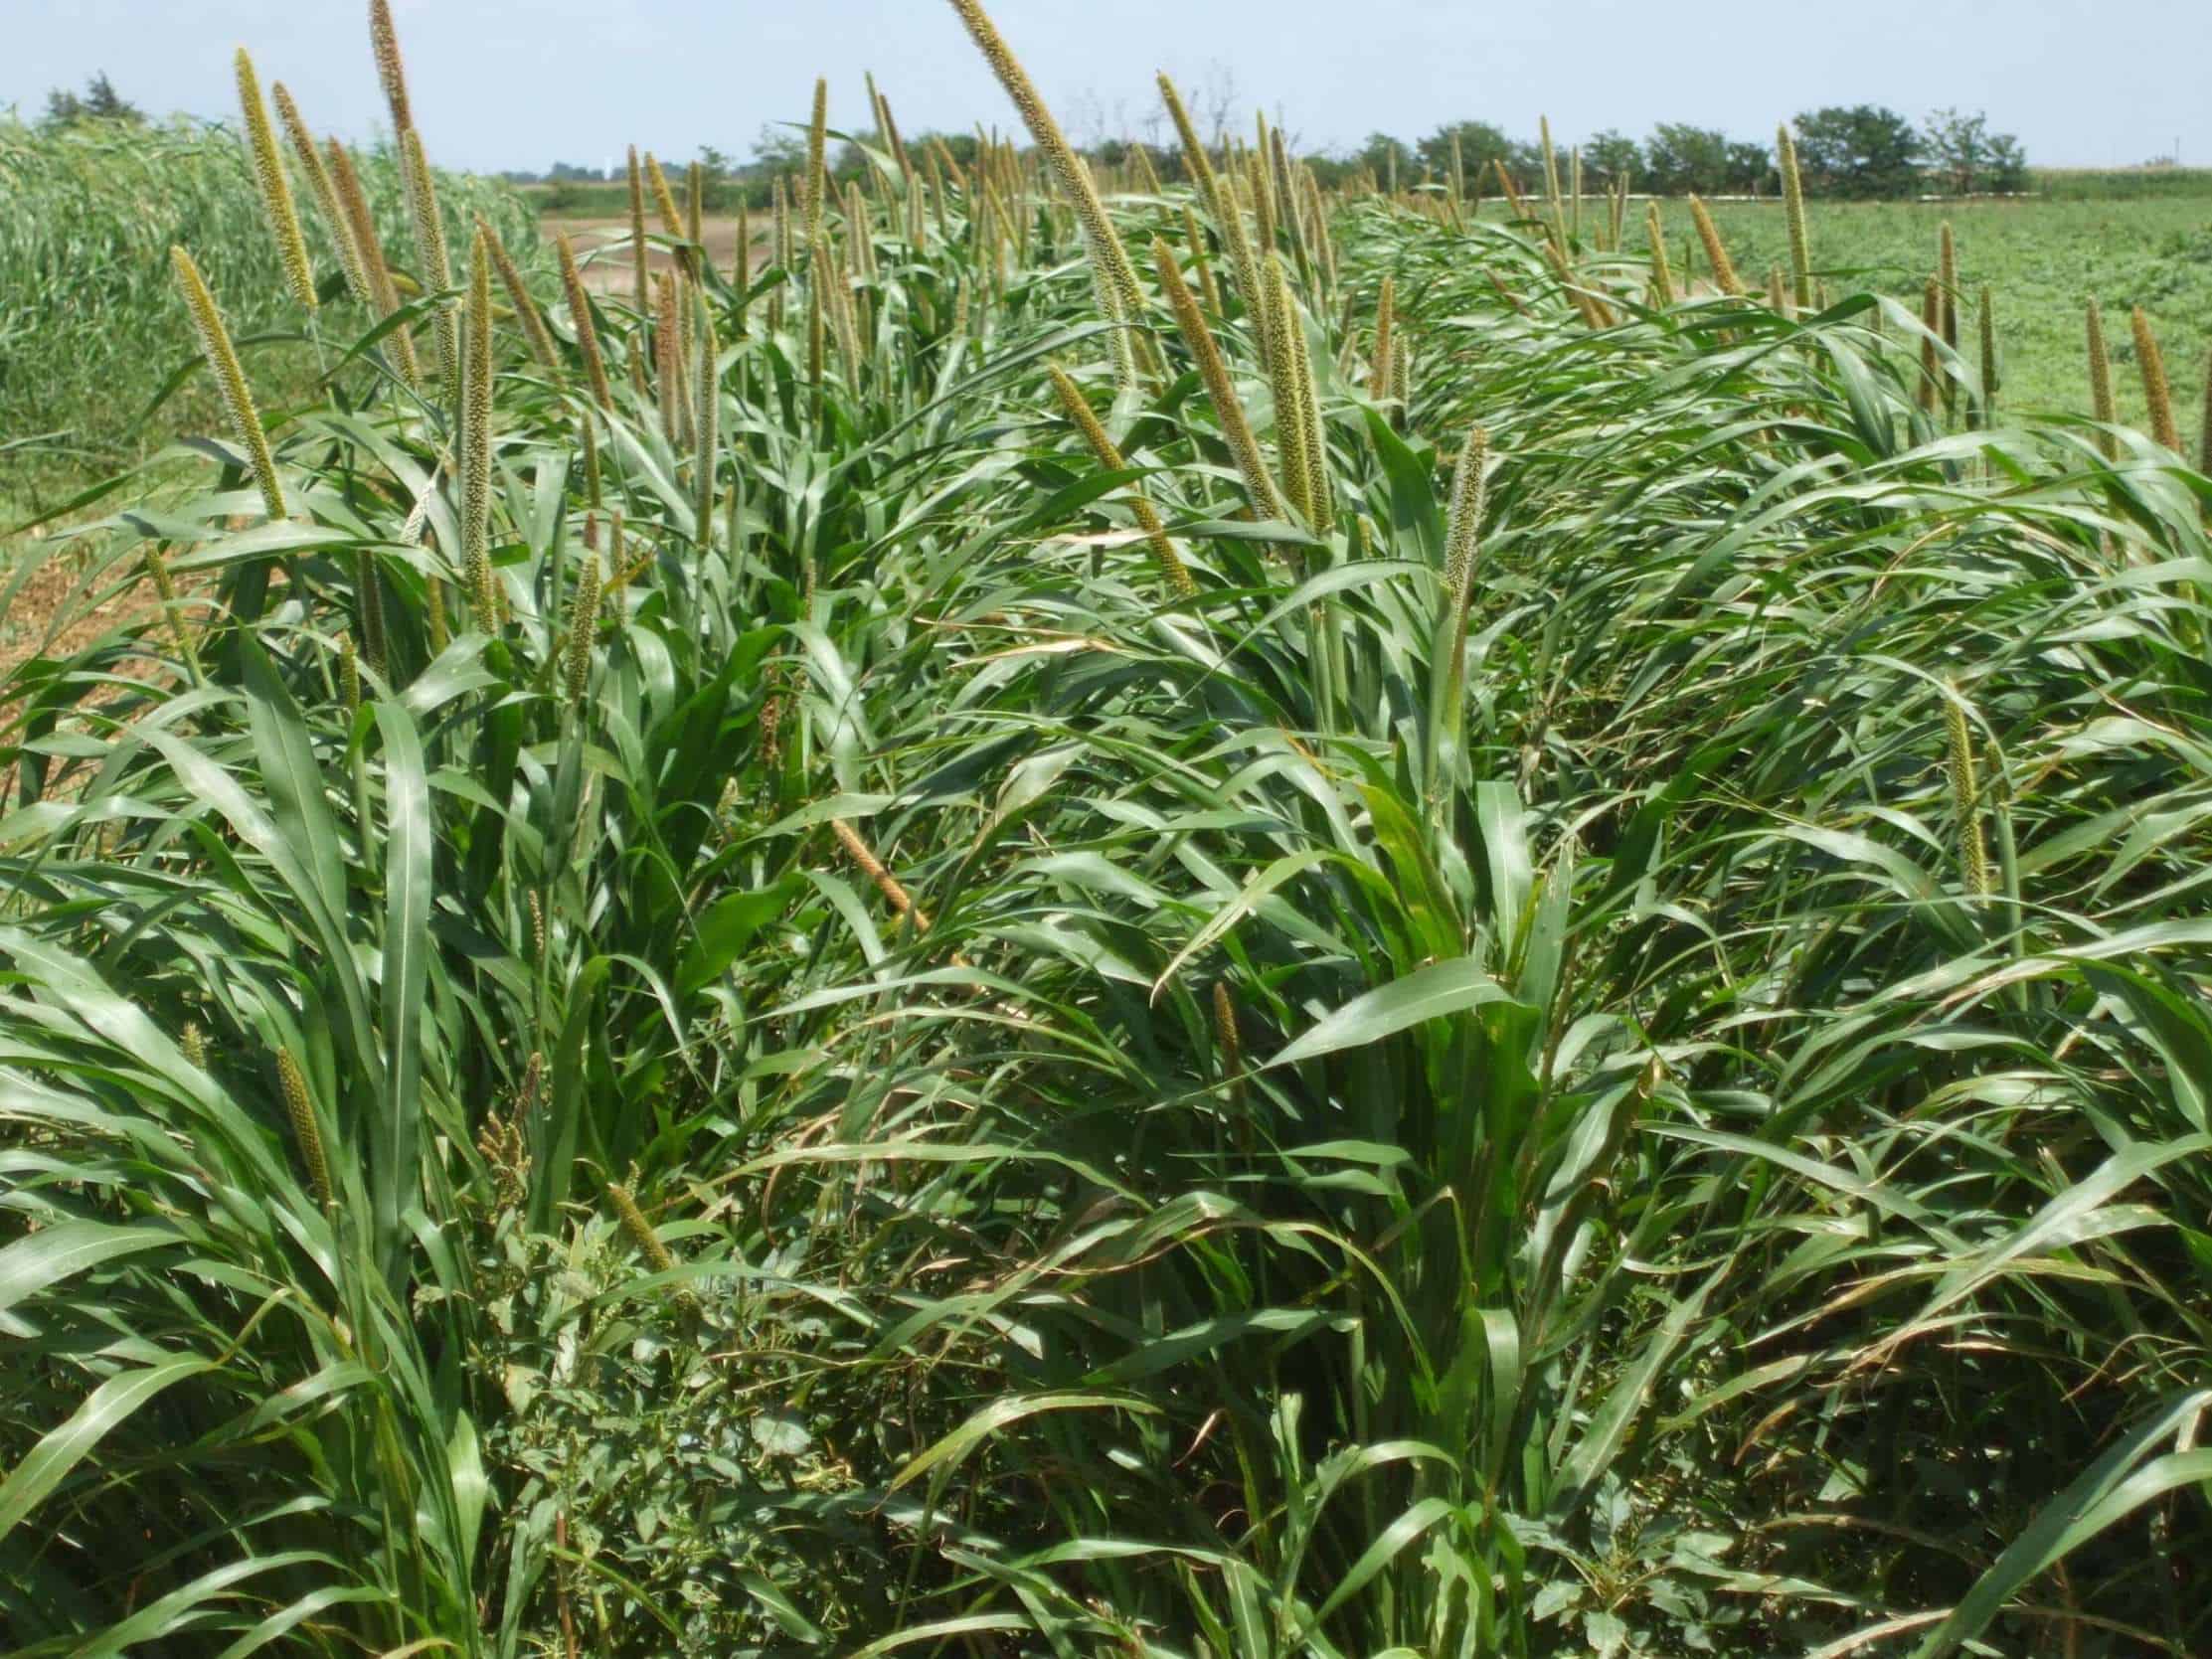 Hybrid Pearl Millet blowing in the wind